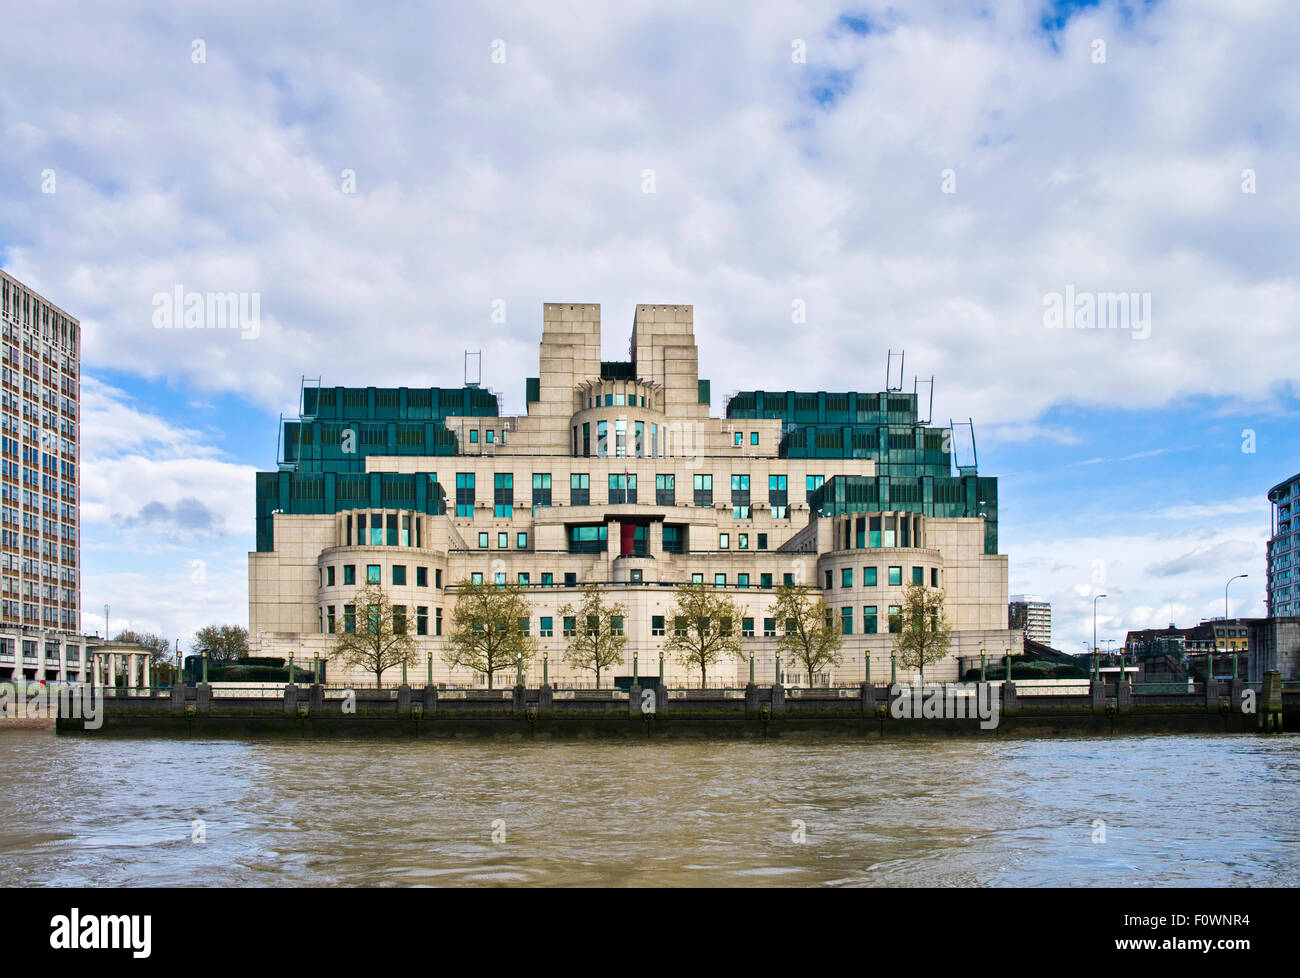 The British Secret Intelligence Service (MI6) headquarters building at Vauxhall, seen from the River Thames, London England UK Stock Photo